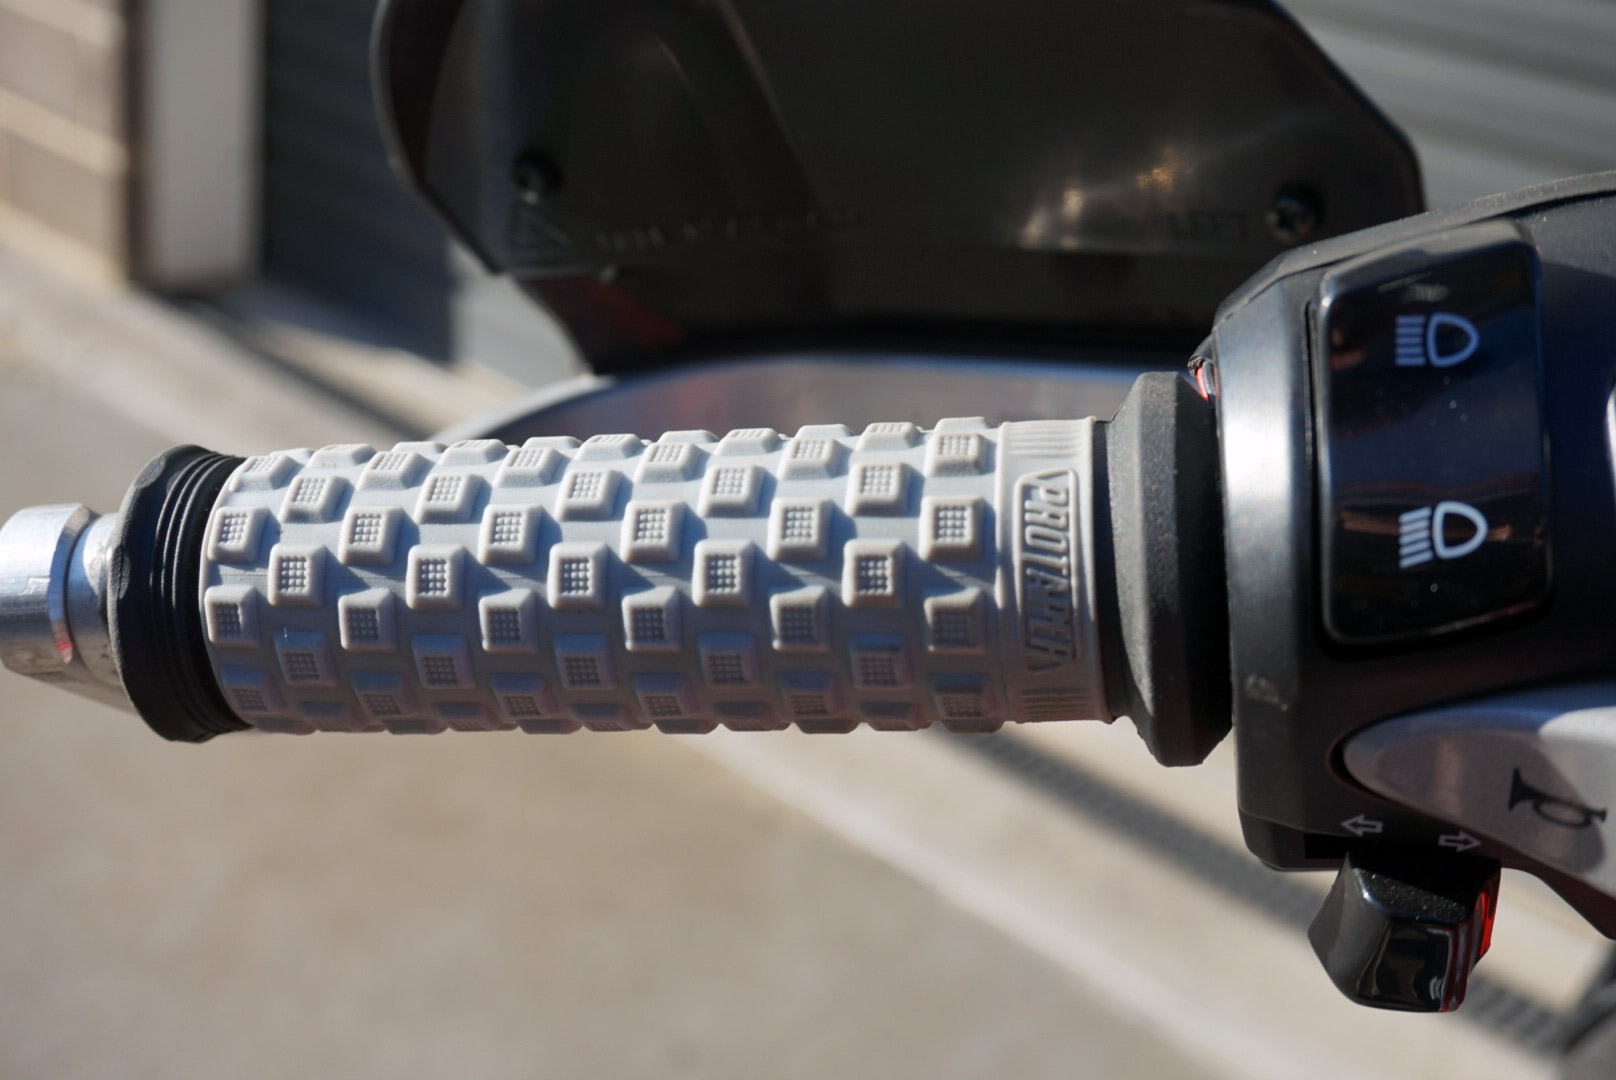 The Pro Taper Pillow Top grip installed on the Honda CRF250 Rally